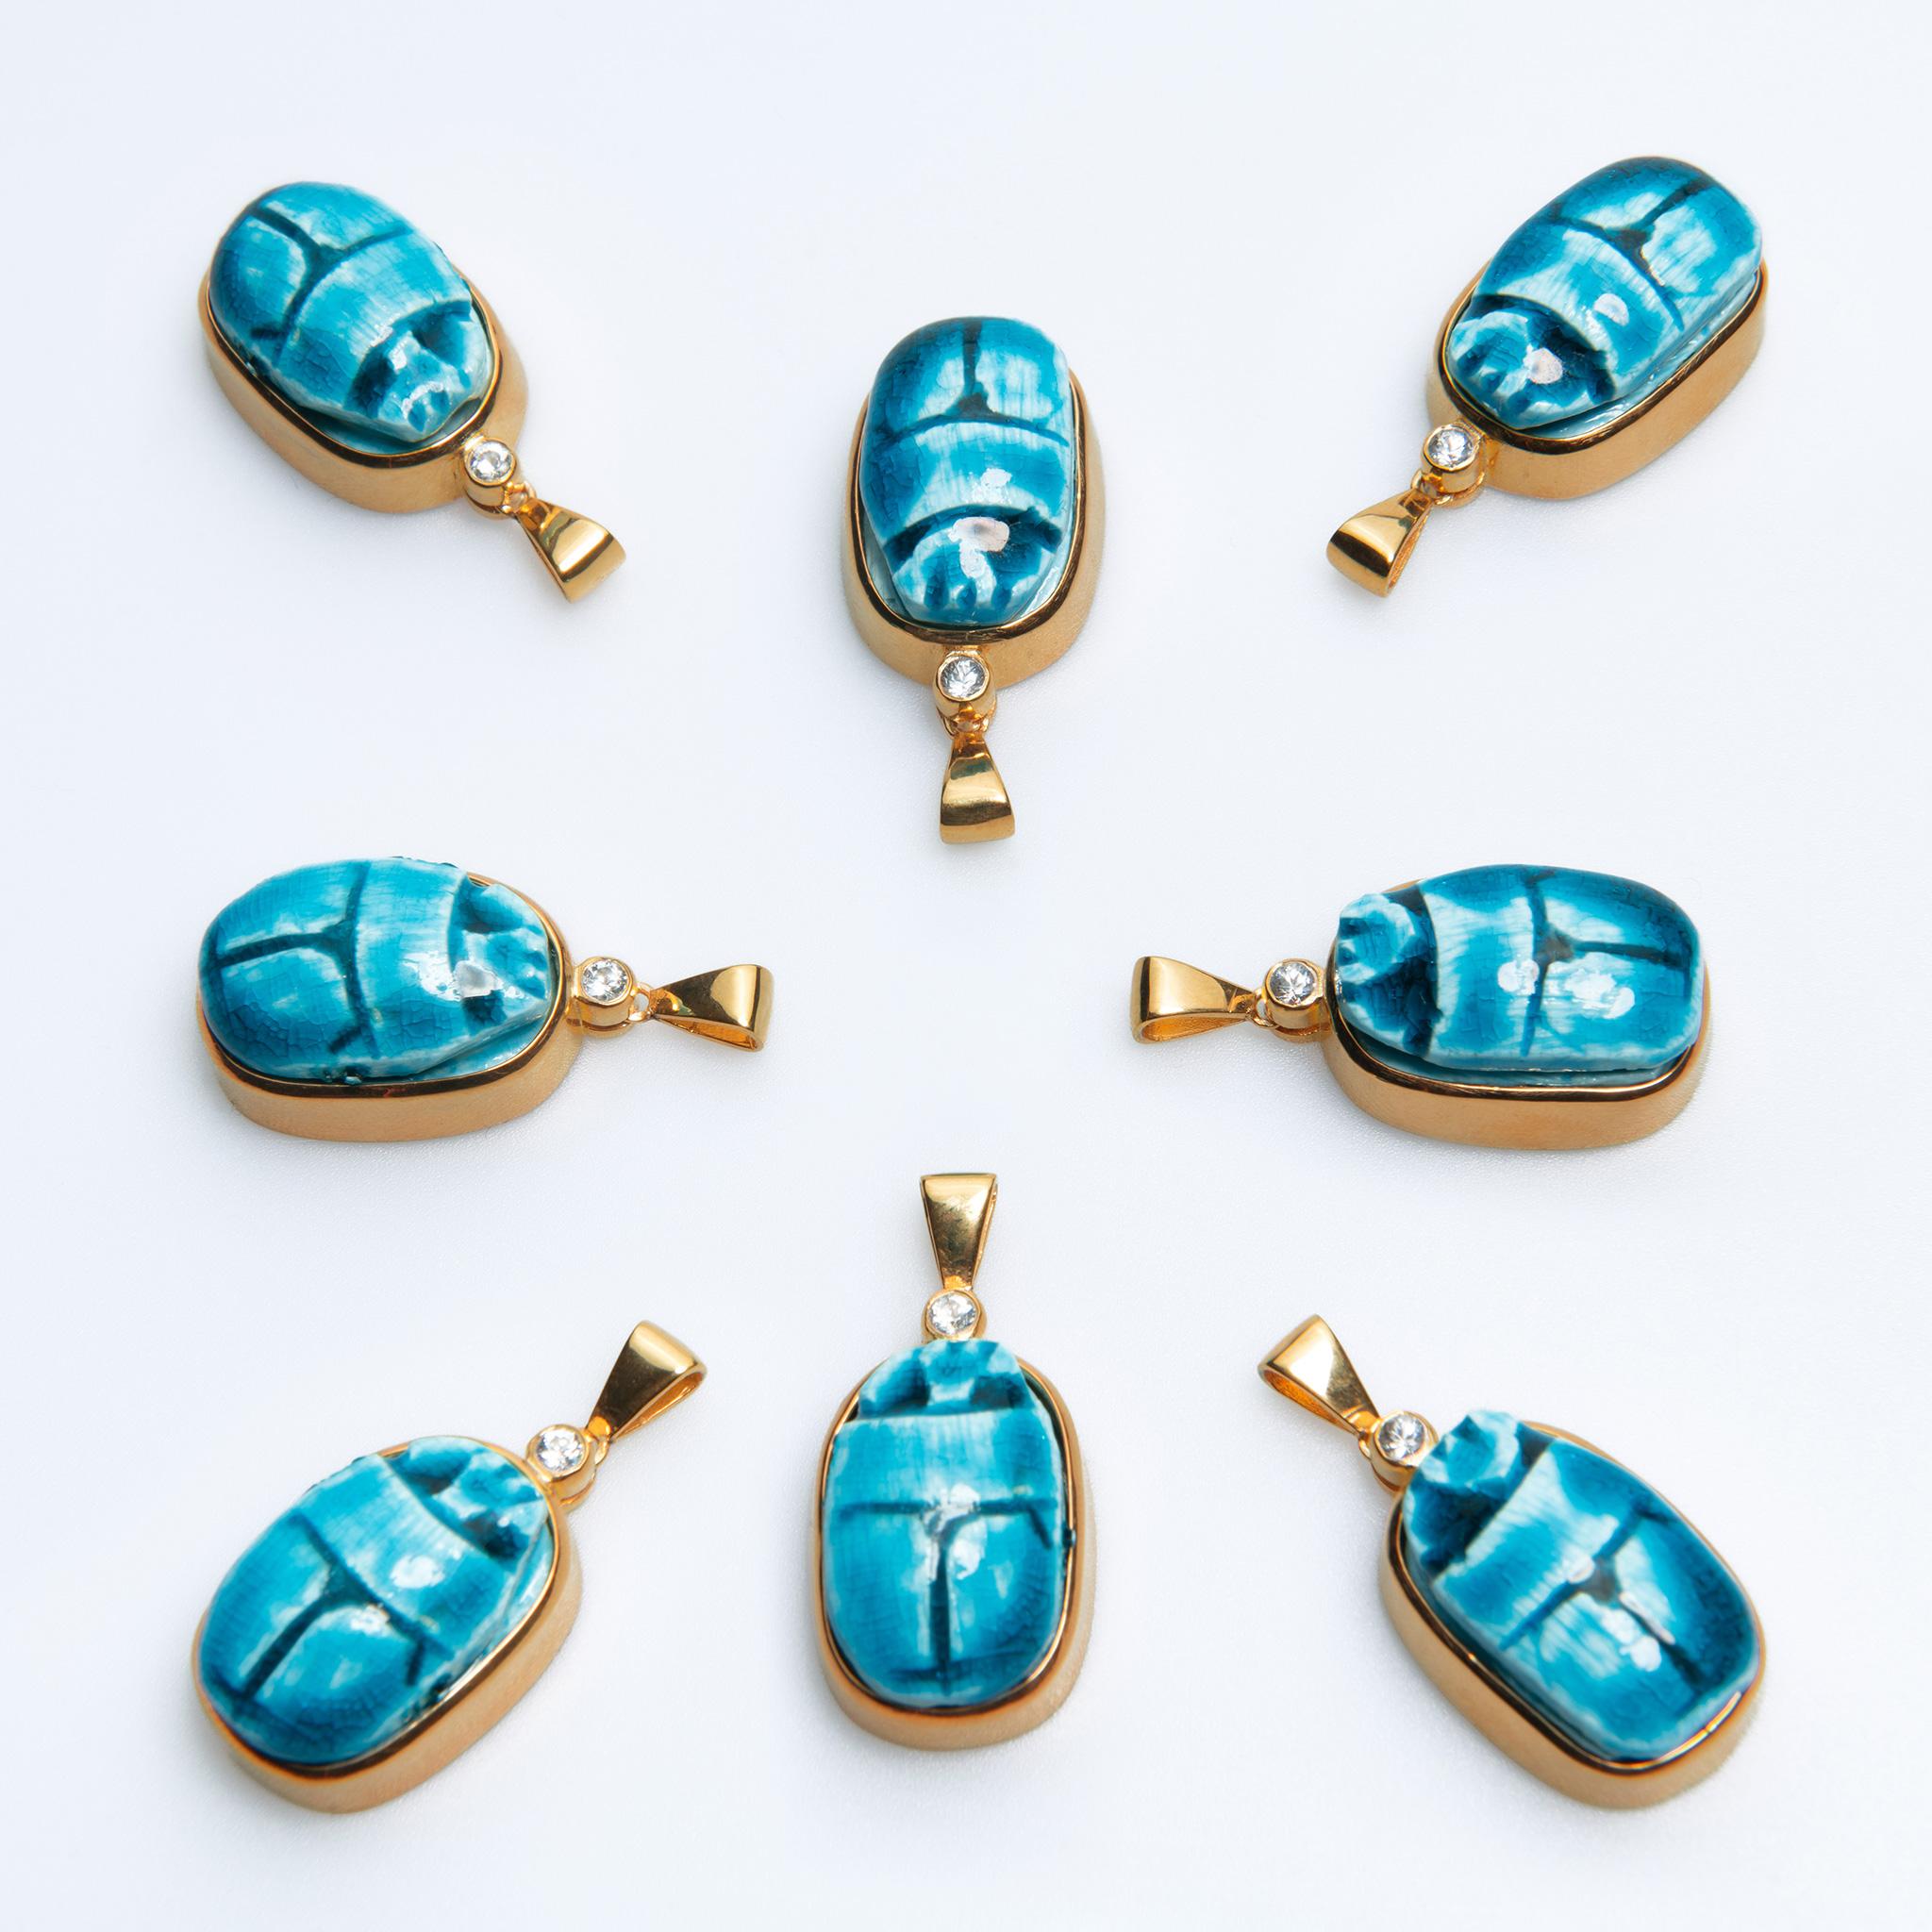 -Each Scarab charm, symbolizing the god Ra, showcases meticulous craftsmanship from Istanbul's Grand Bazaar and hand-made detailing from Egypt, reflecting a blend of splendor from a celebrated era.
- Designed to elevate any look, this charm pairs